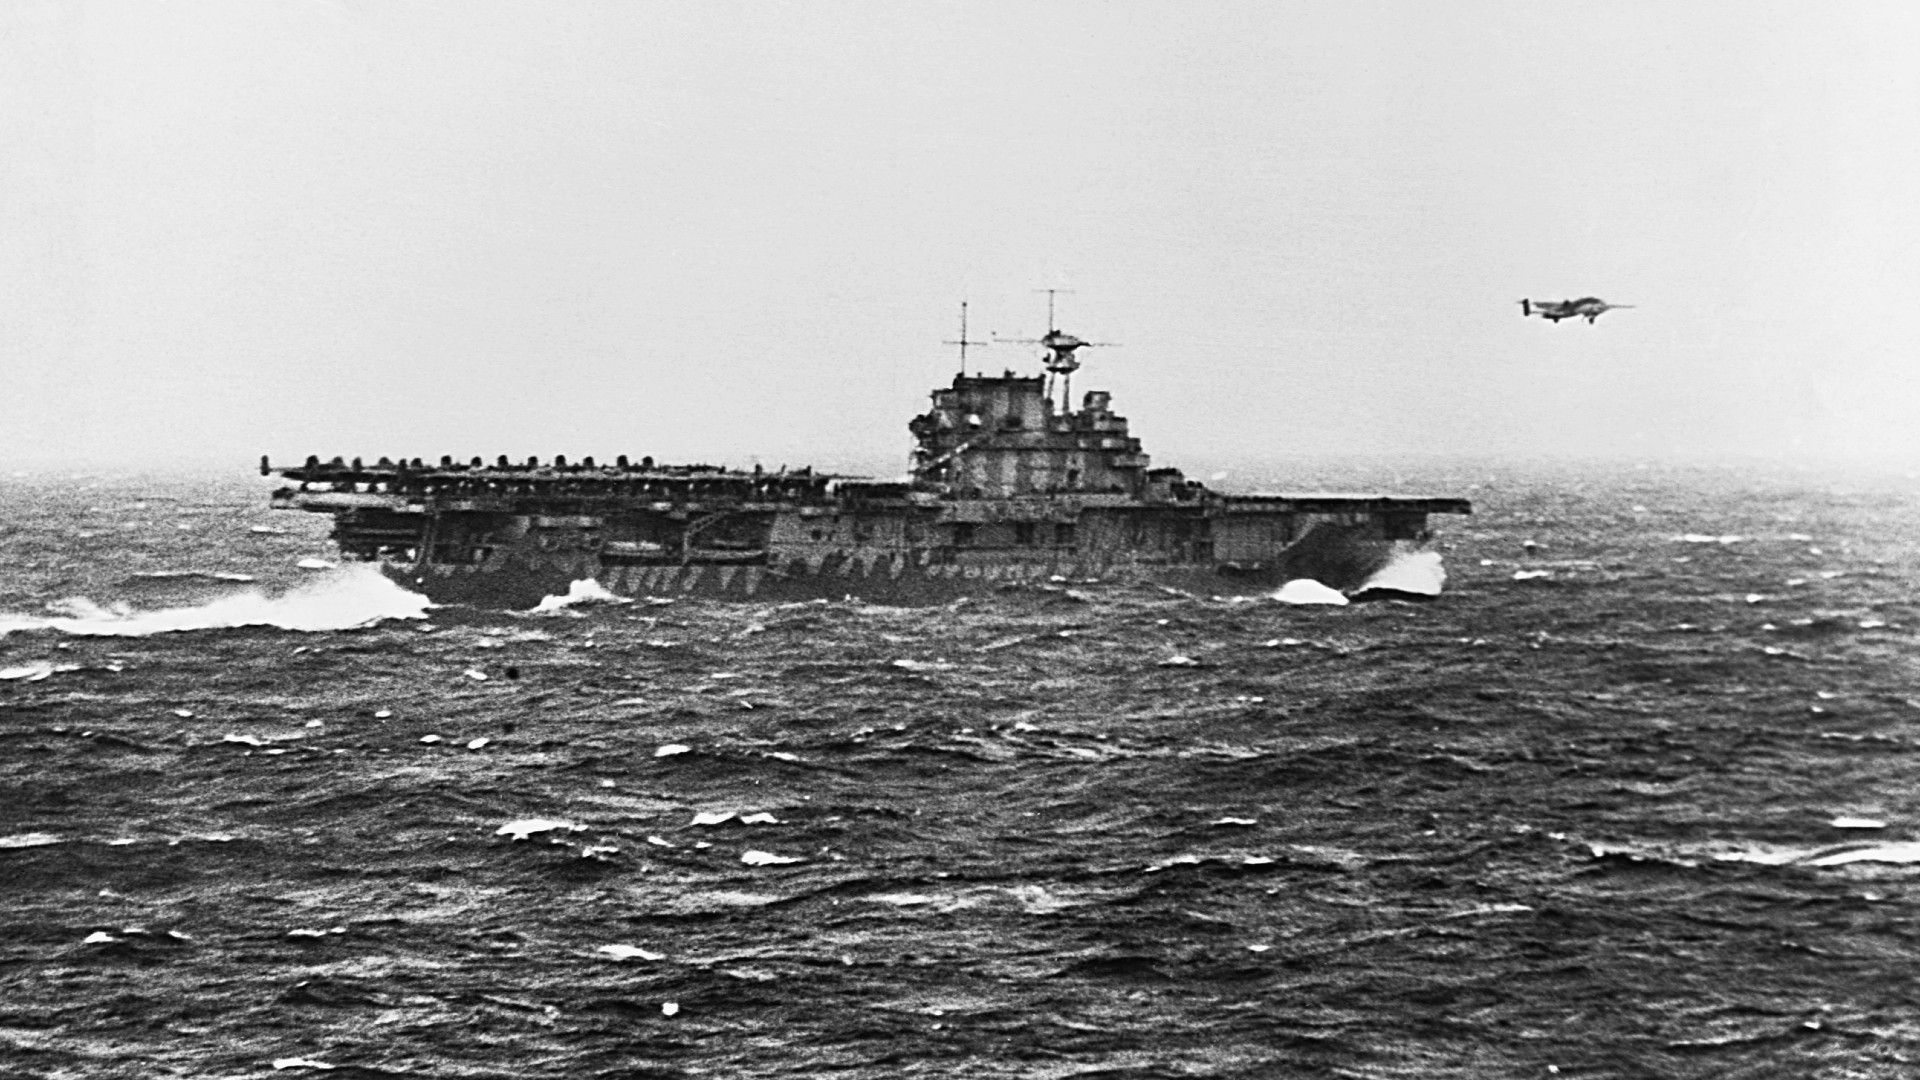 The USS Hornet, the aircraft carrier used in the raid